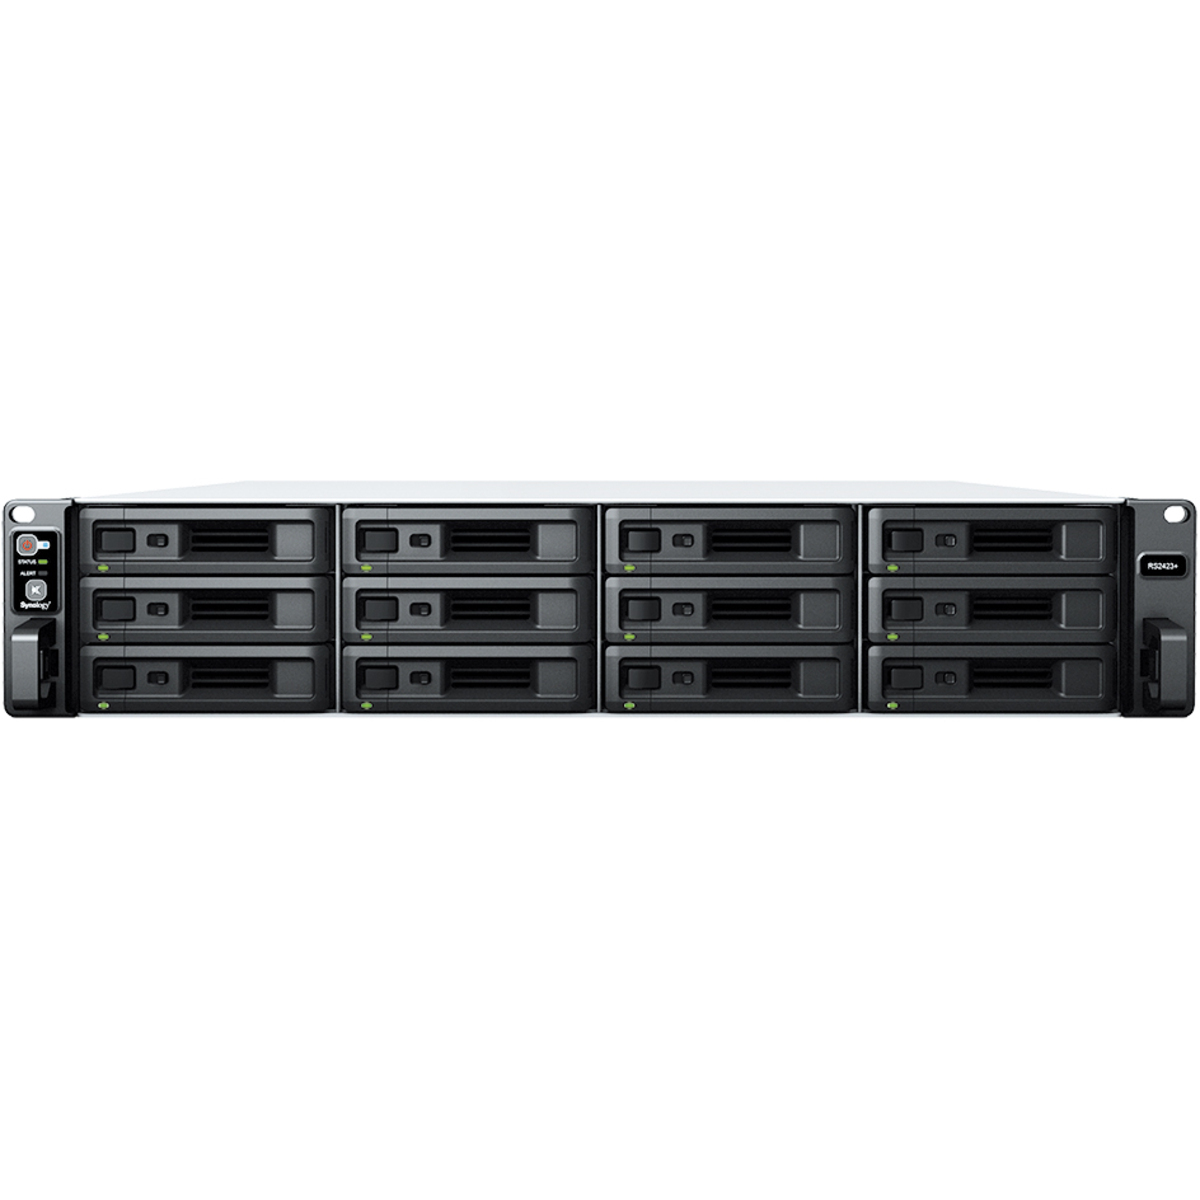 Synology RackStation RS2423RP+ 60tb 12-Bay RackMount Multimedia / Power User / Business NAS - Network Attached Storage Device 10x6tb Western Digital Gold WD6003FRYZ 3.5 7200rpm SATA 6Gb/s HDD ENTERPRISE Class Drives Installed - Burn-In Tested - FREE RAM UPGRADE RackStation RS2423RP+